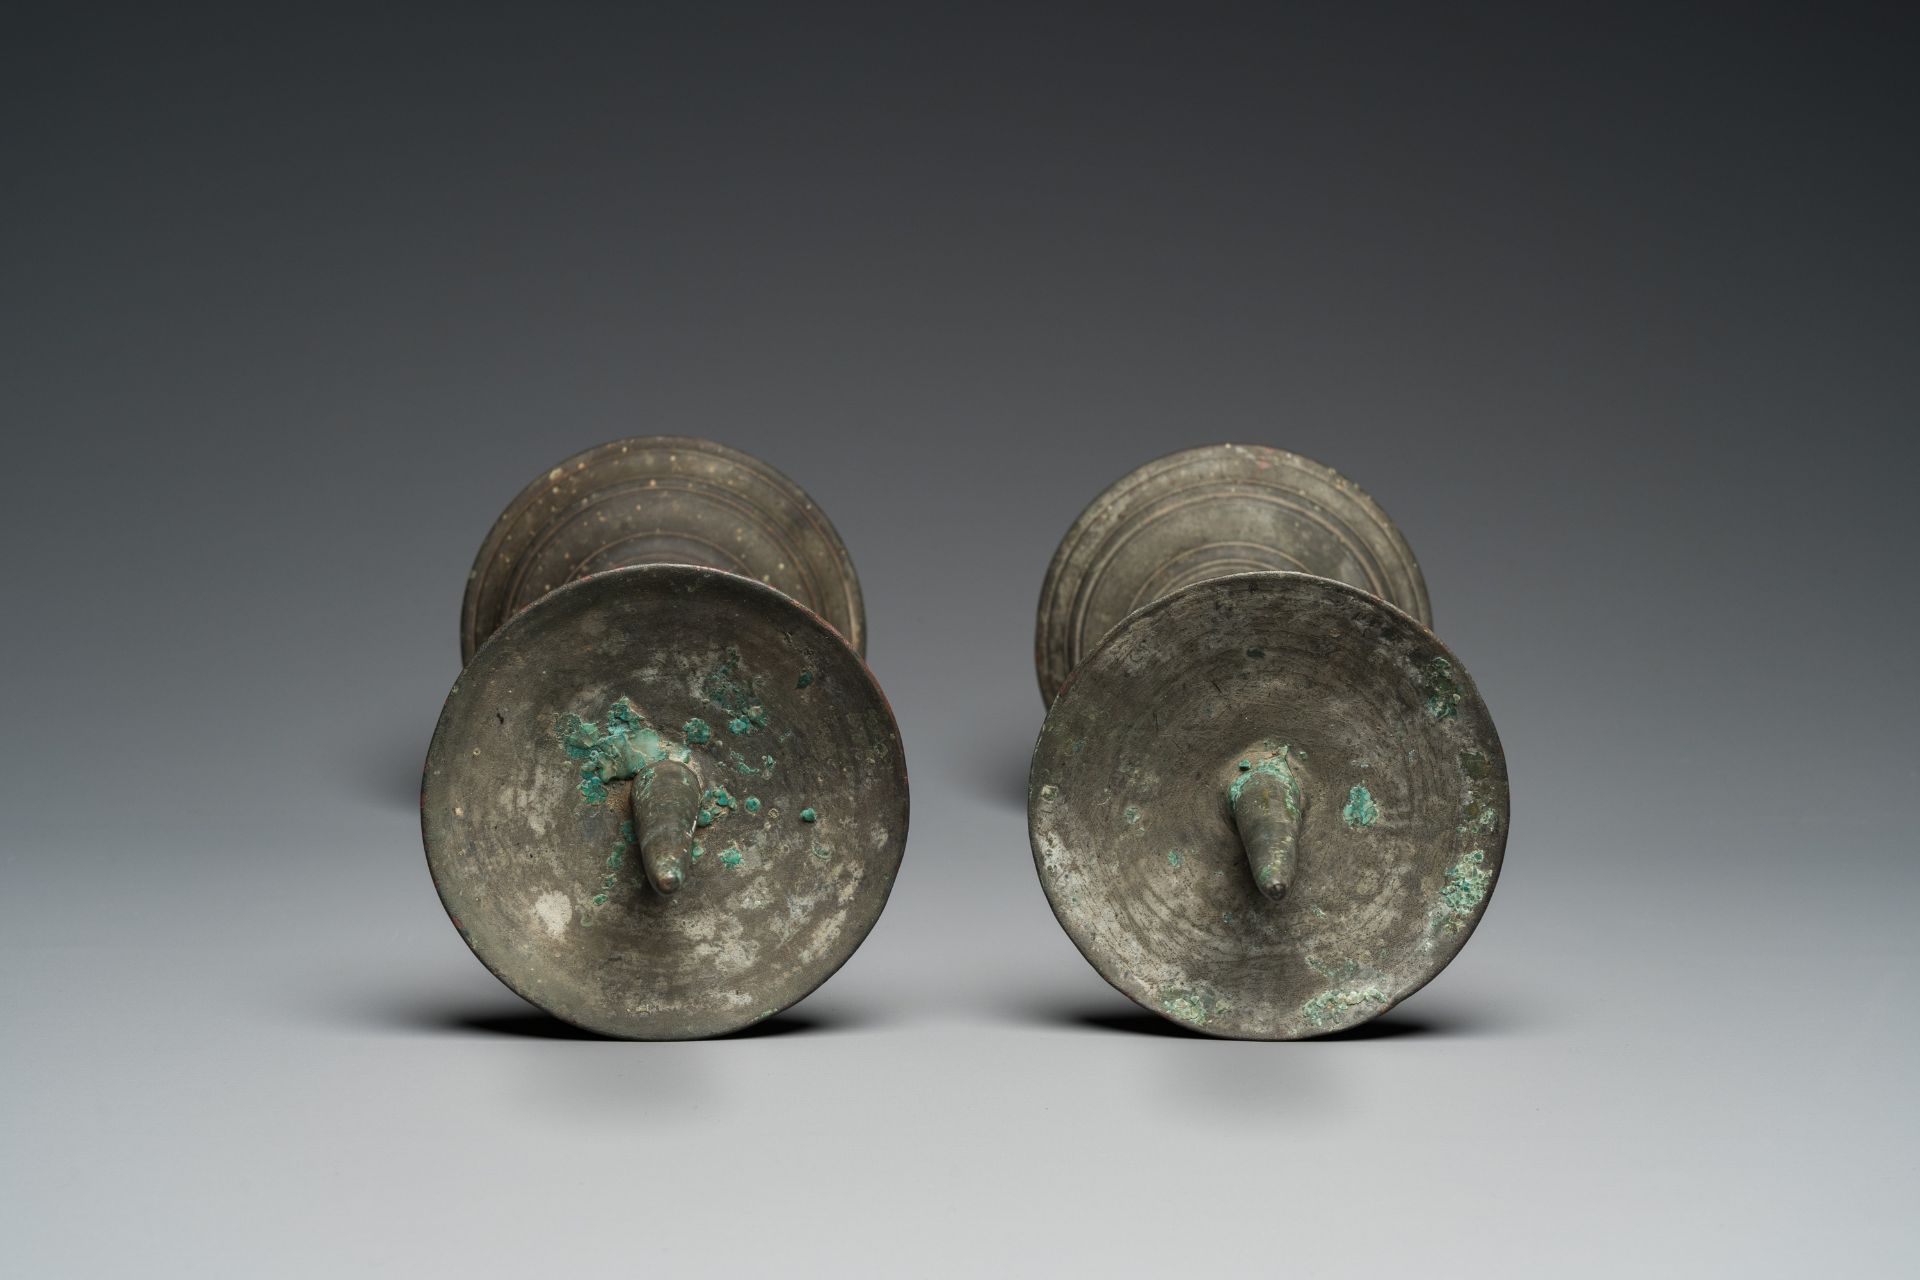 A pair of patinated bronze pricket candlesticks, France, 17th C. - Image 6 of 7